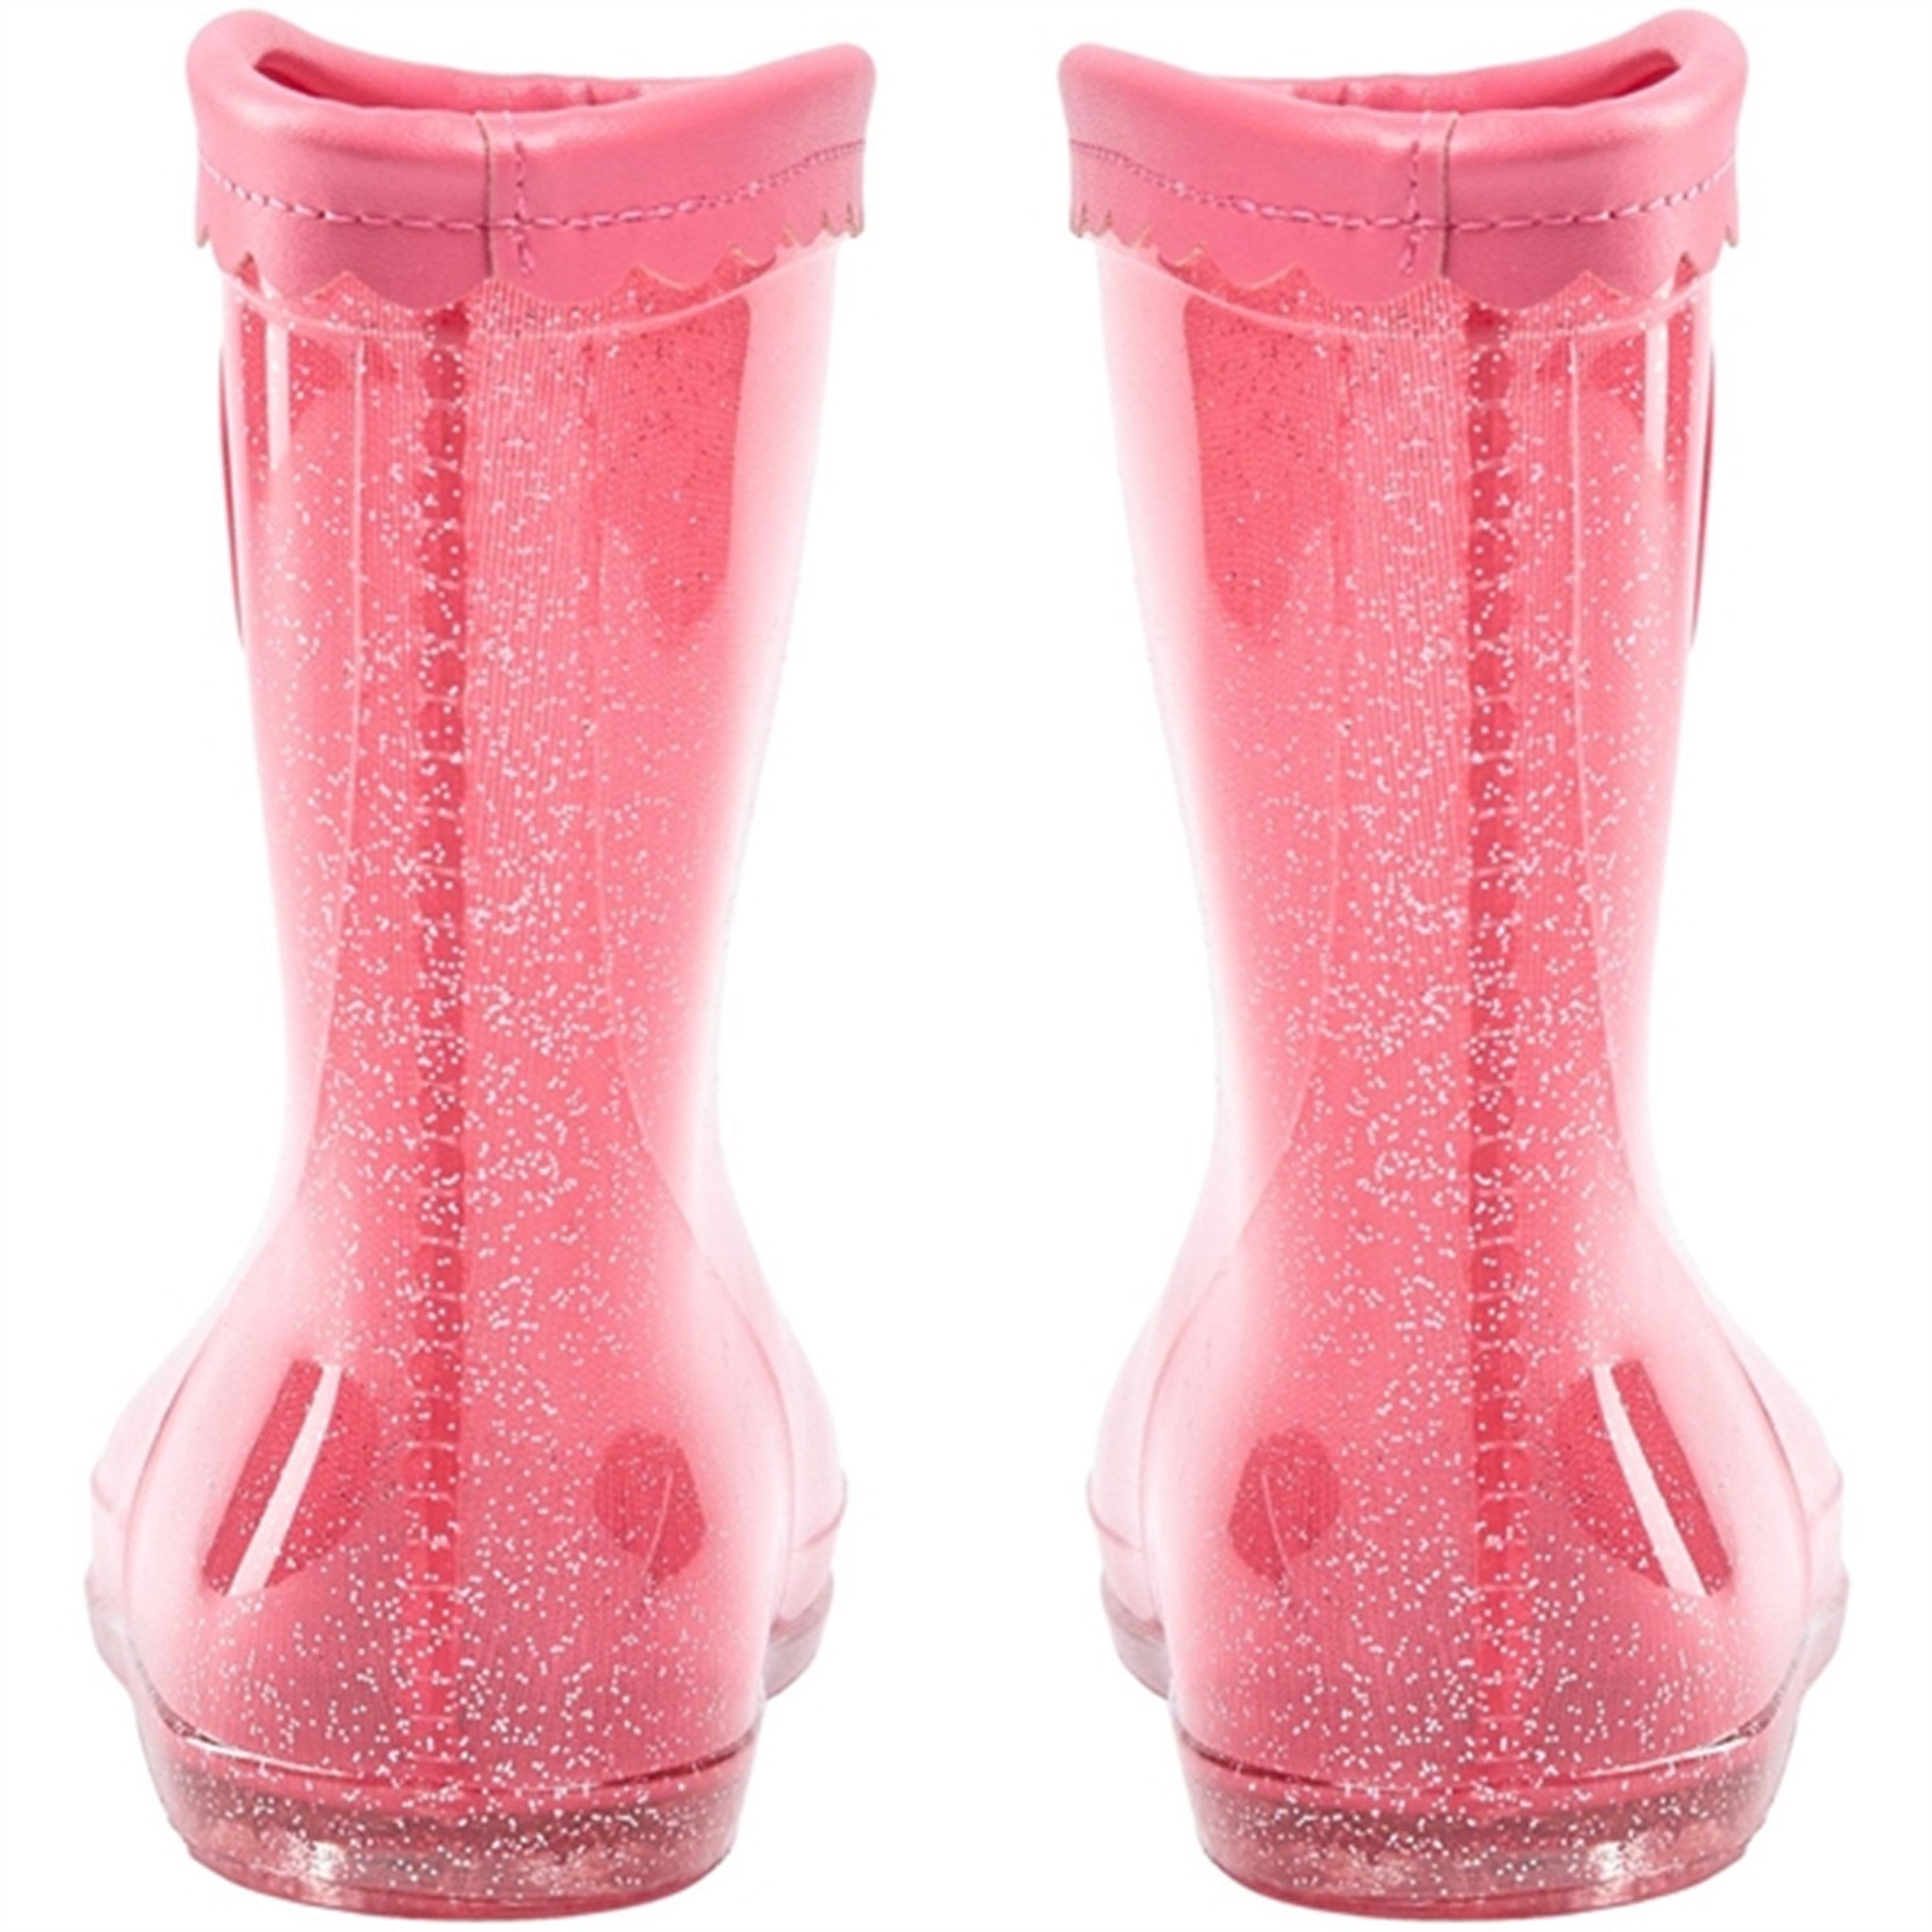 Sofie Schnoor Rubber Boots Coral Pink 4